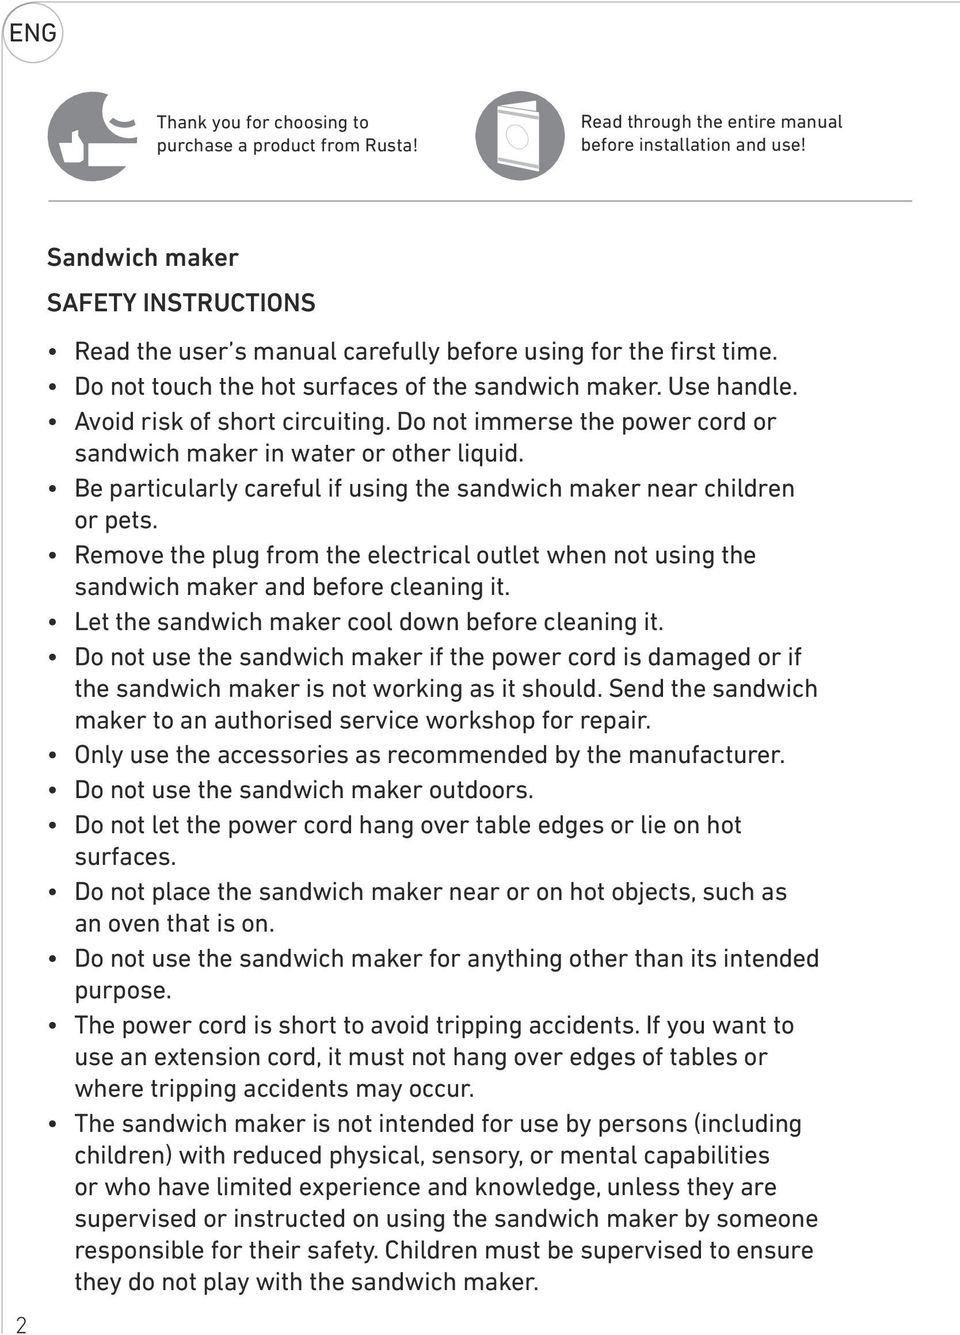 Do not immerse the power cord or sandwich maker in water or other liquid. Be particularly careful if using the sandwich maker near children or pets.